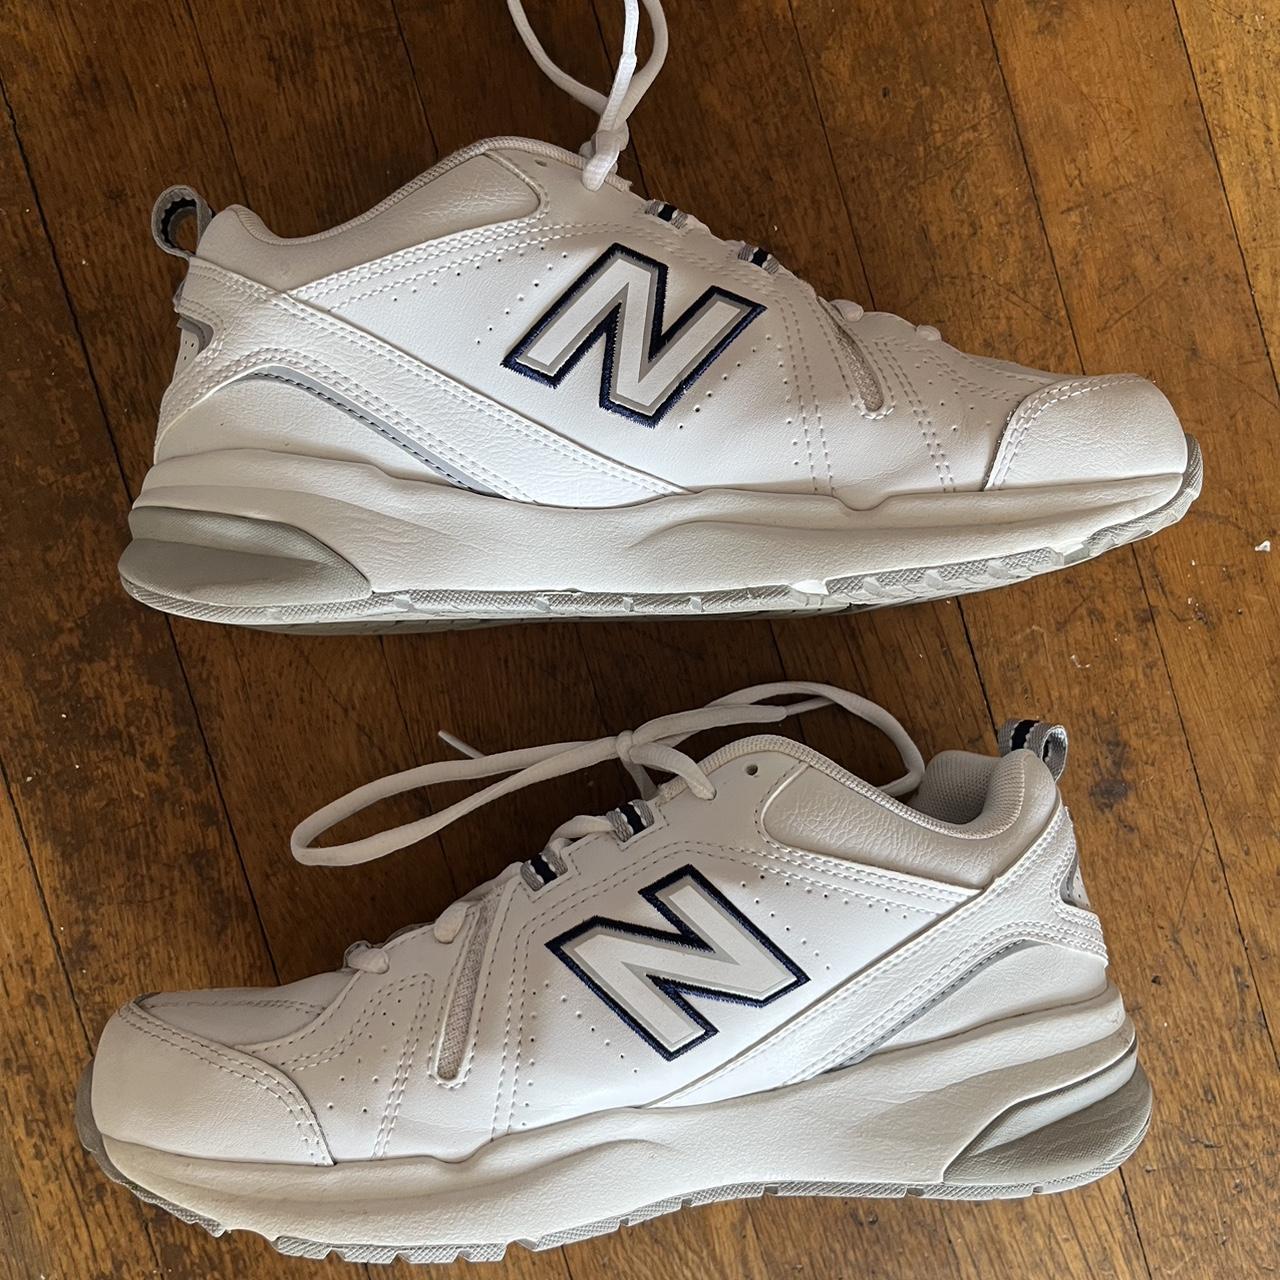 New Balance Women's White and Blue Trainers